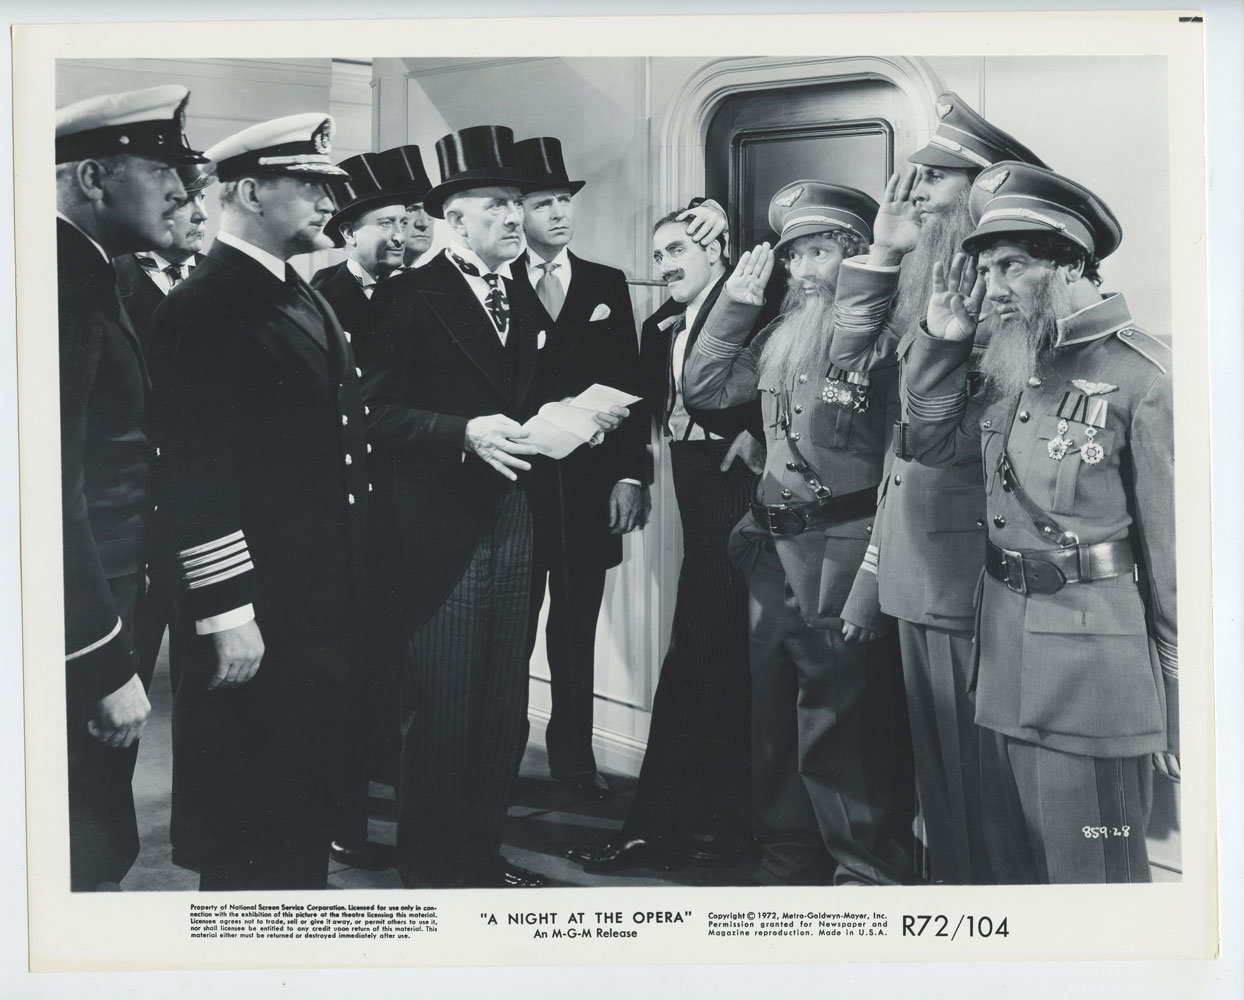 Marx Brothers Photo 1935 A Night at the Opera Original Vintage R72